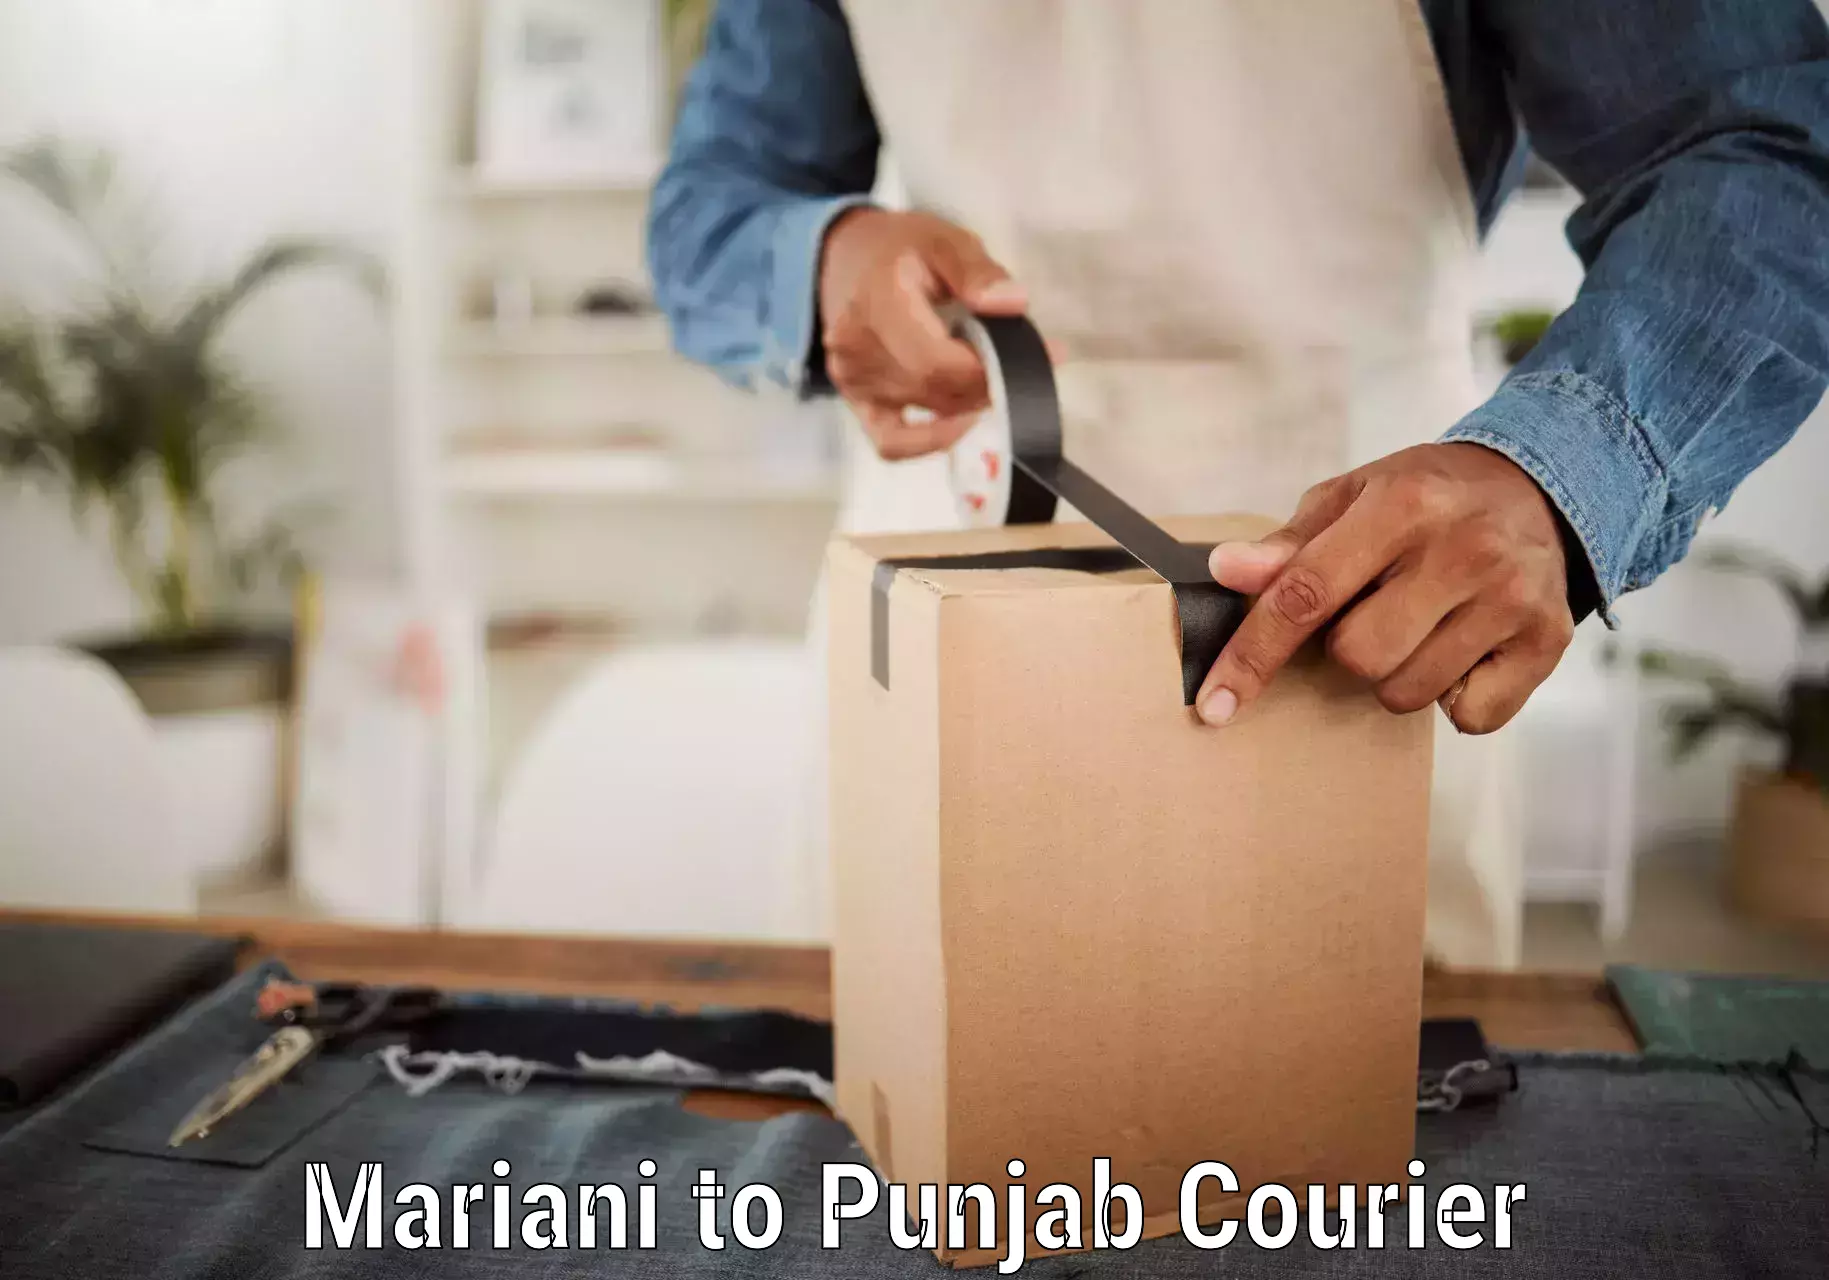 Cargo delivery service Mariani to Punjab